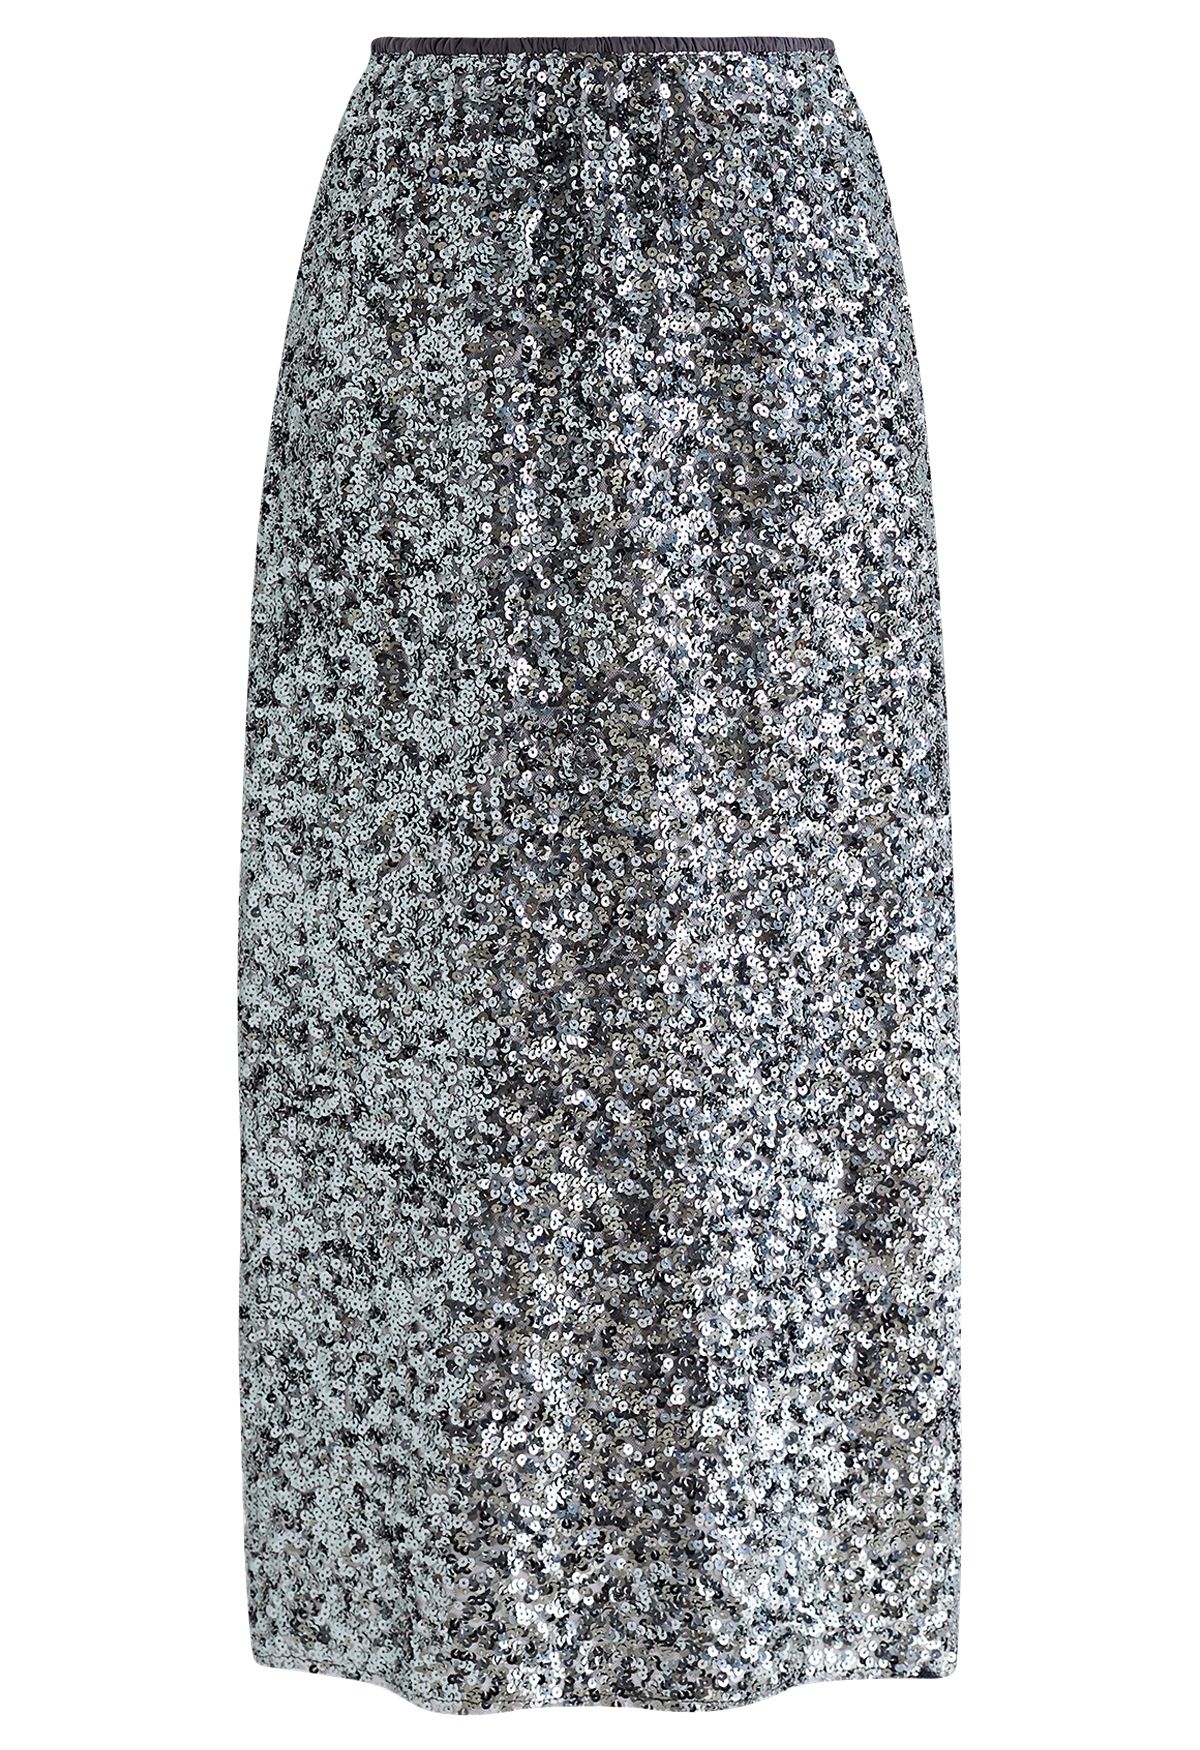 Iridescent Sequin Embellished Pencil Skirt in Silver - Retro, Indie and ...